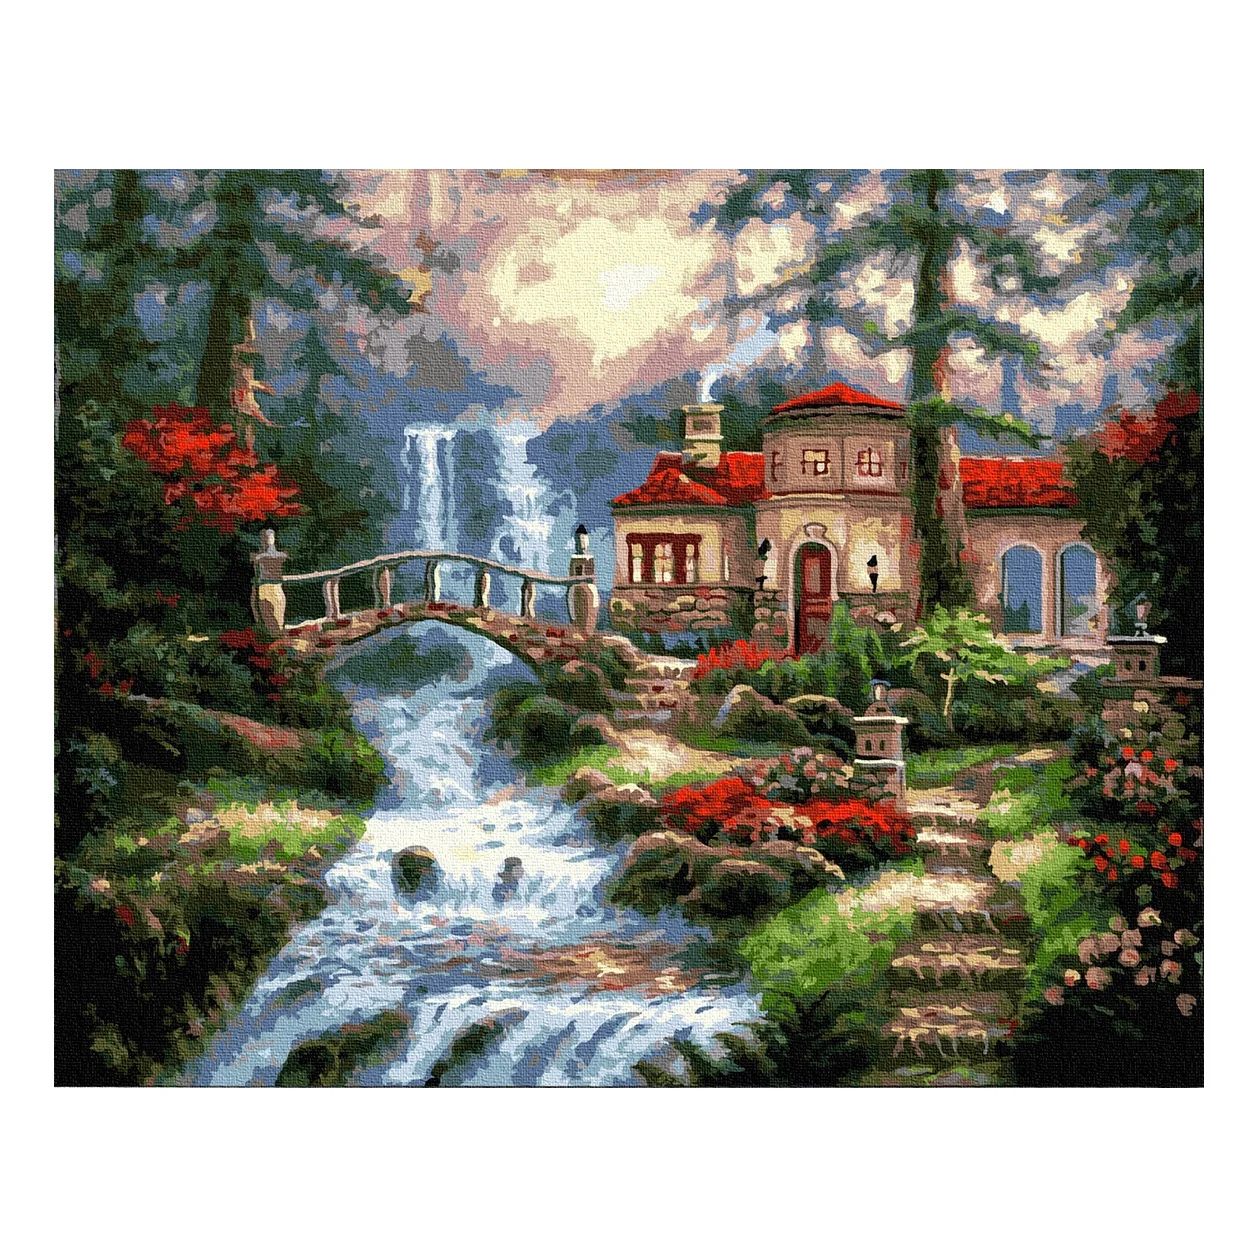 Paint boy Forest villa scenery oil painting digital diy waterfall landscape painting 40*50cm  decorative painting (1600132417807)